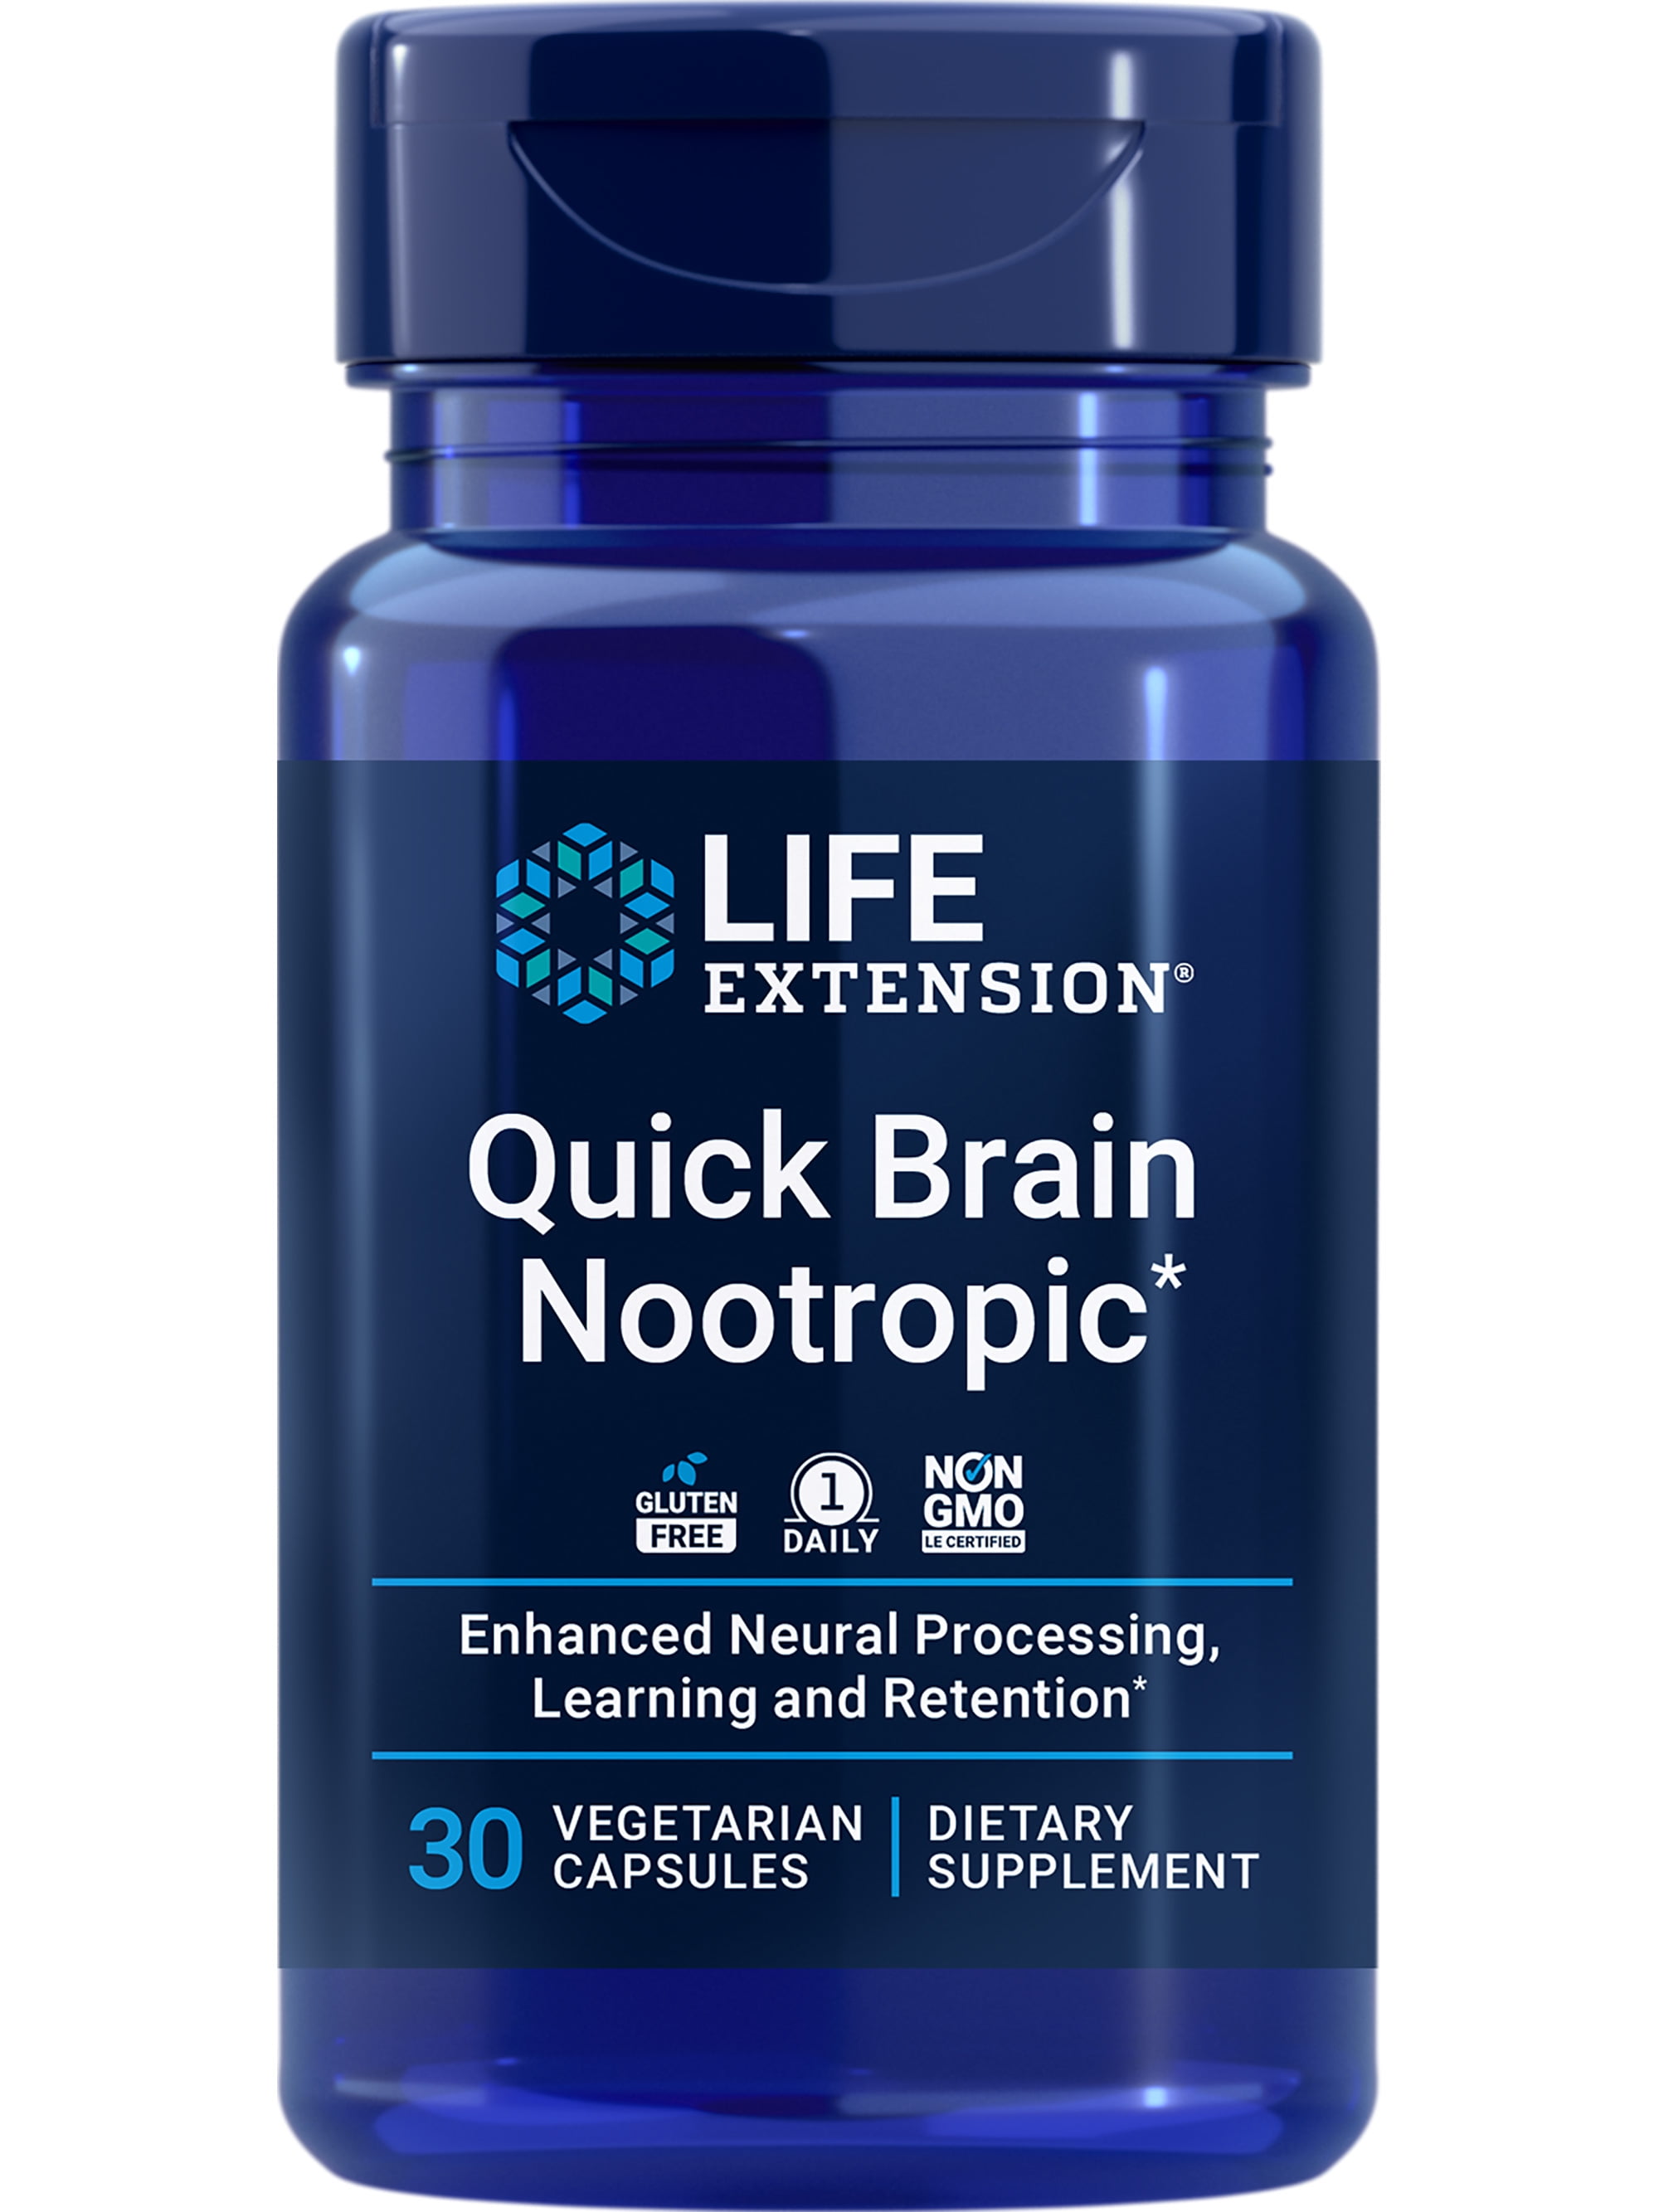 Nootropic for Learning and Retention